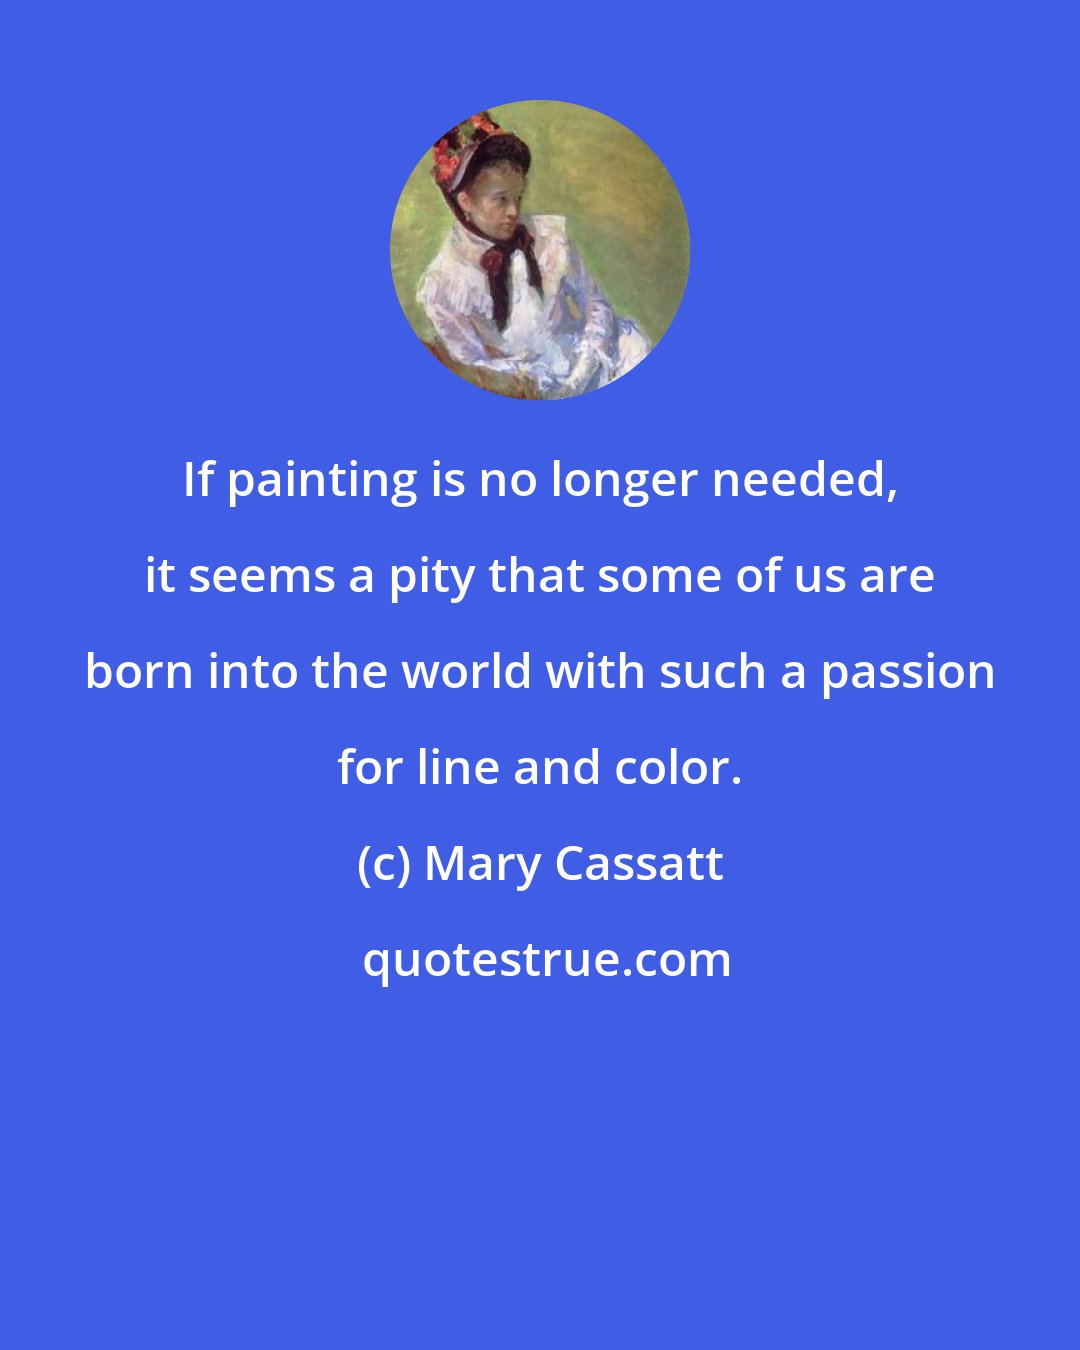 Mary Cassatt: If painting is no longer needed, it seems a pity that some of us are born into the world with such a passion for line and color.